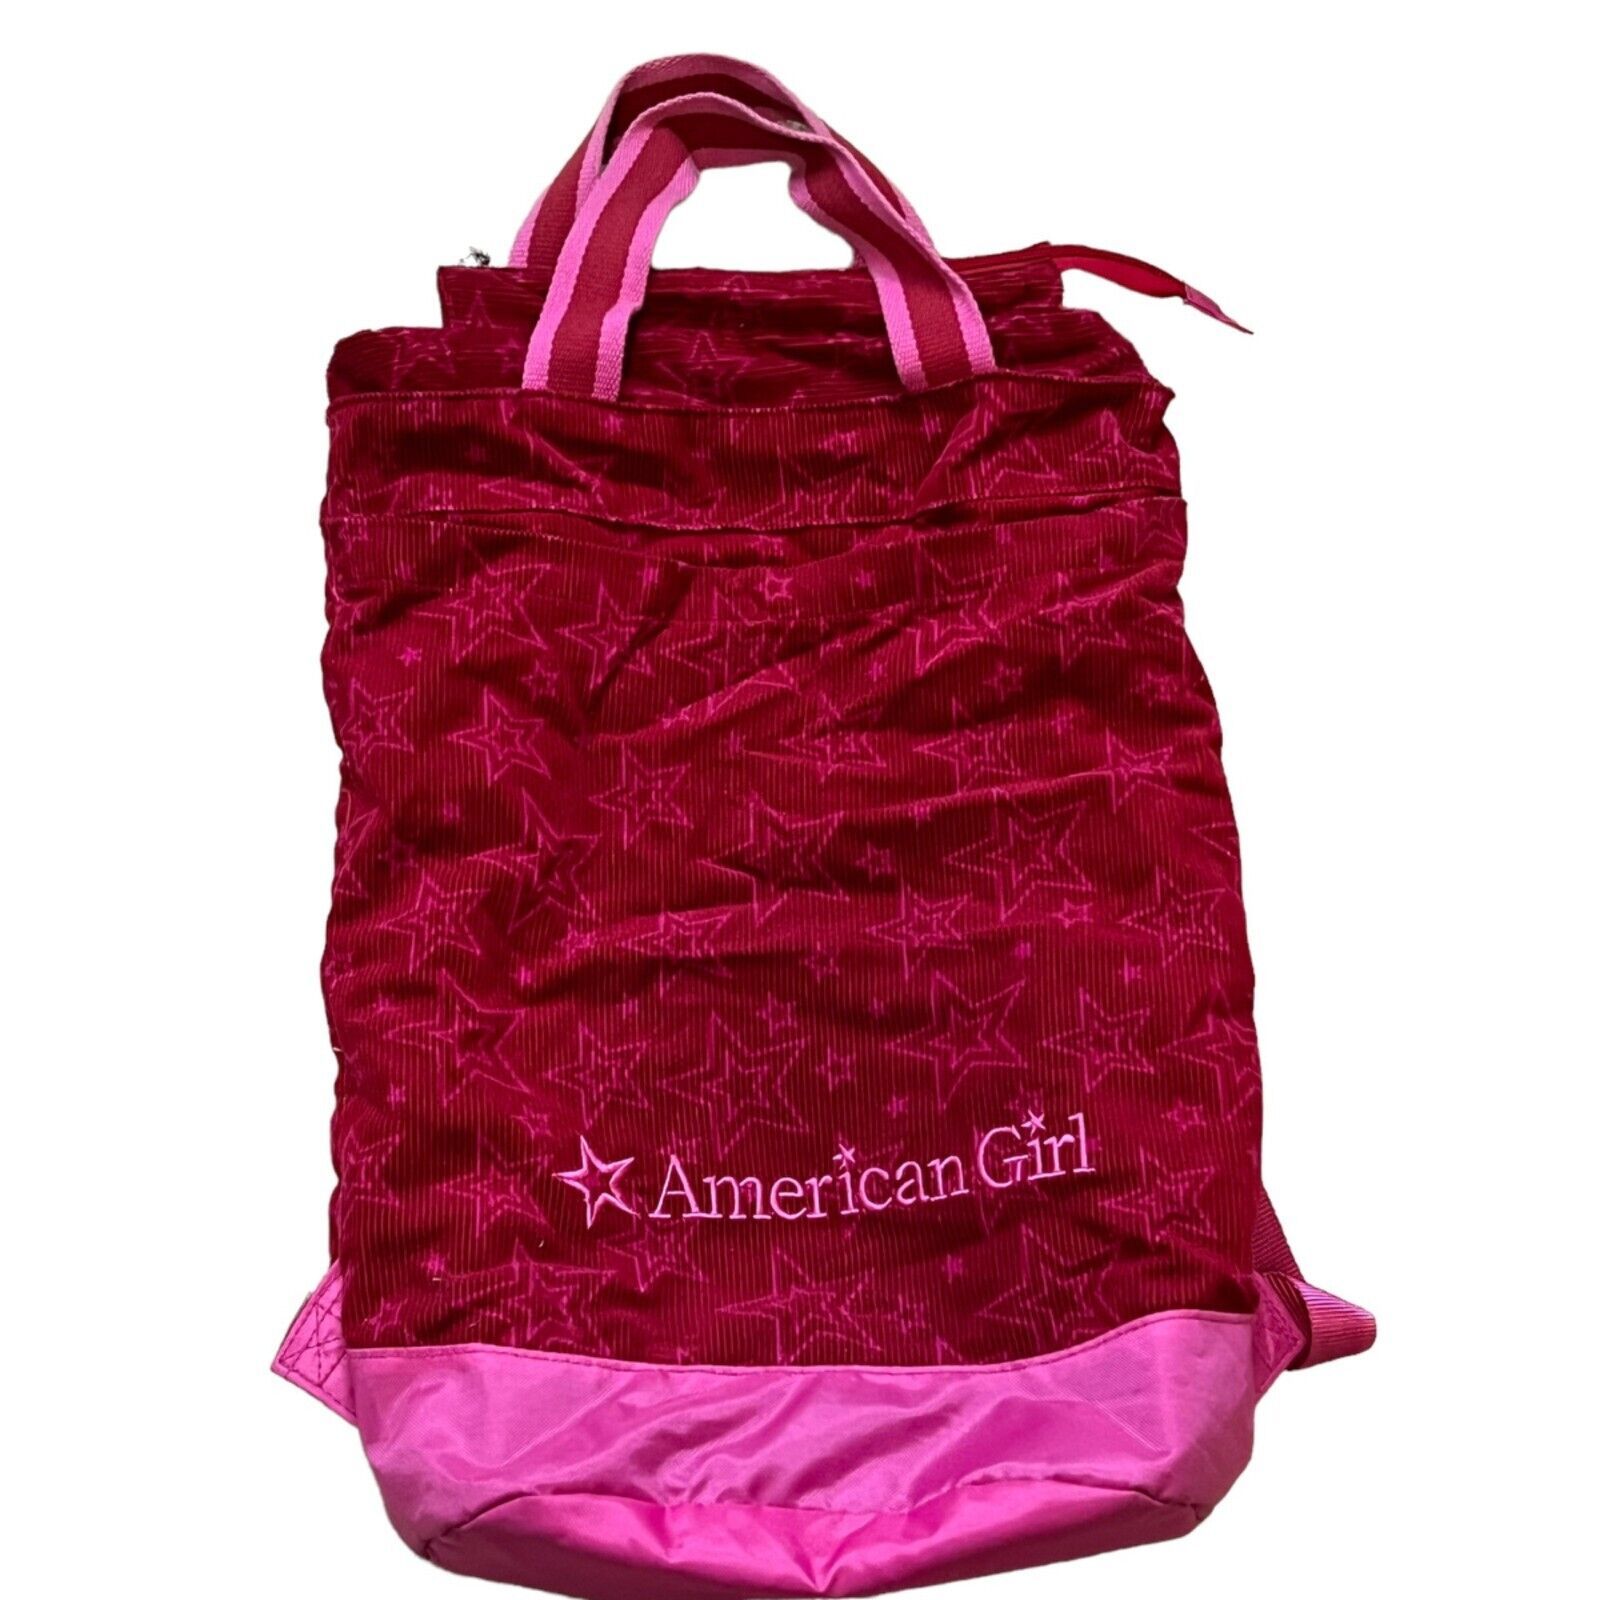 American Girl Doll Velour Backpack for Carrying Doll & Accessories - $24.00